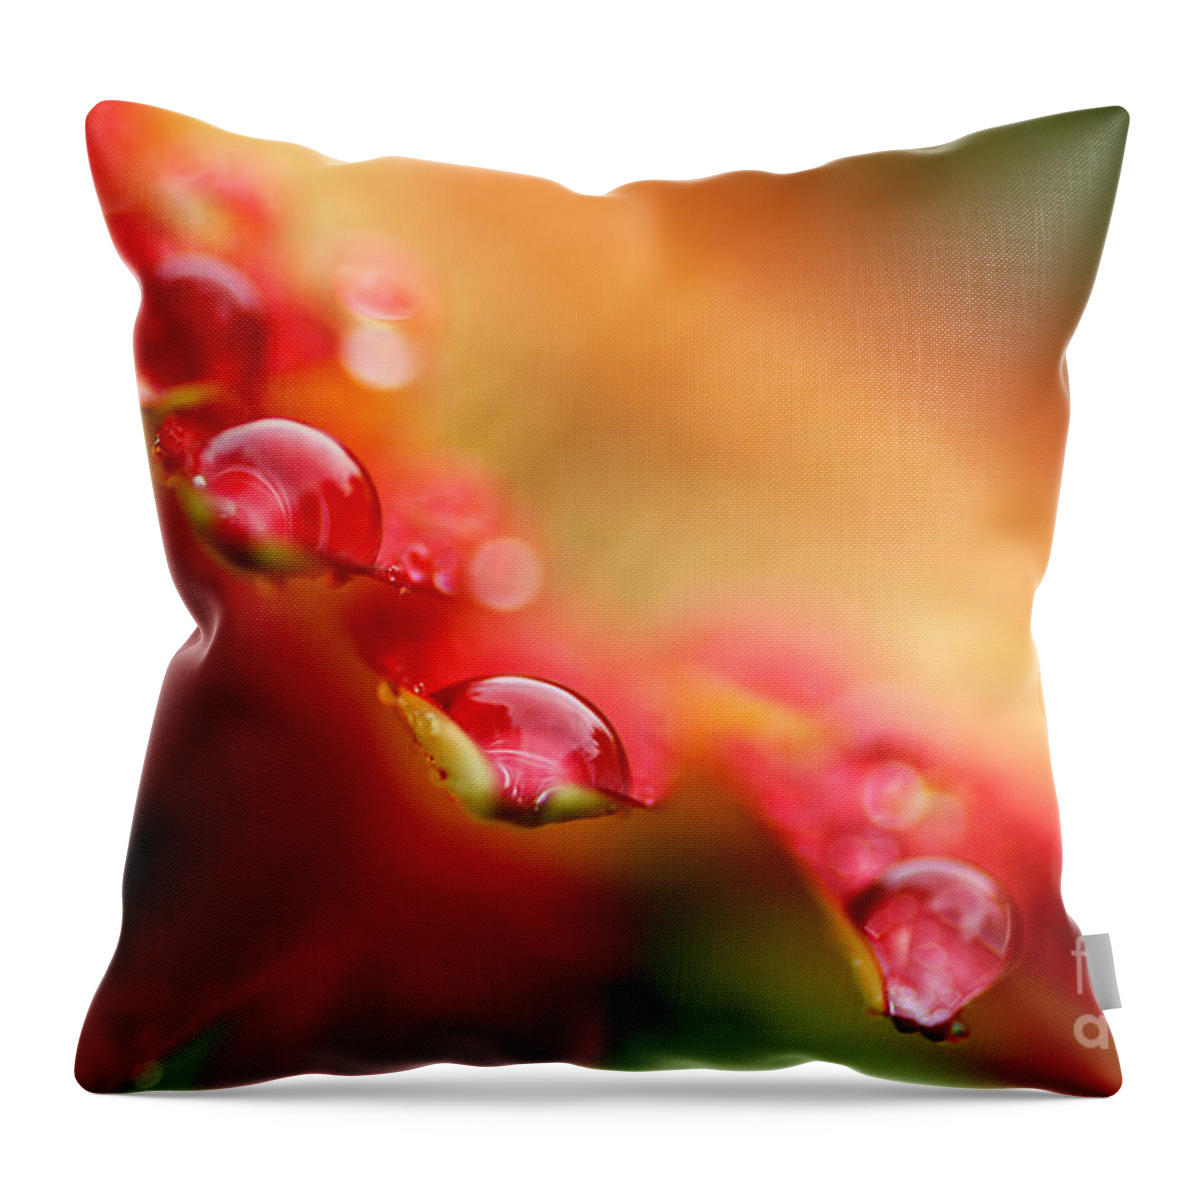 Stunning Throw Pillow featuring the photograph Summer Jewels by Darren Fisher